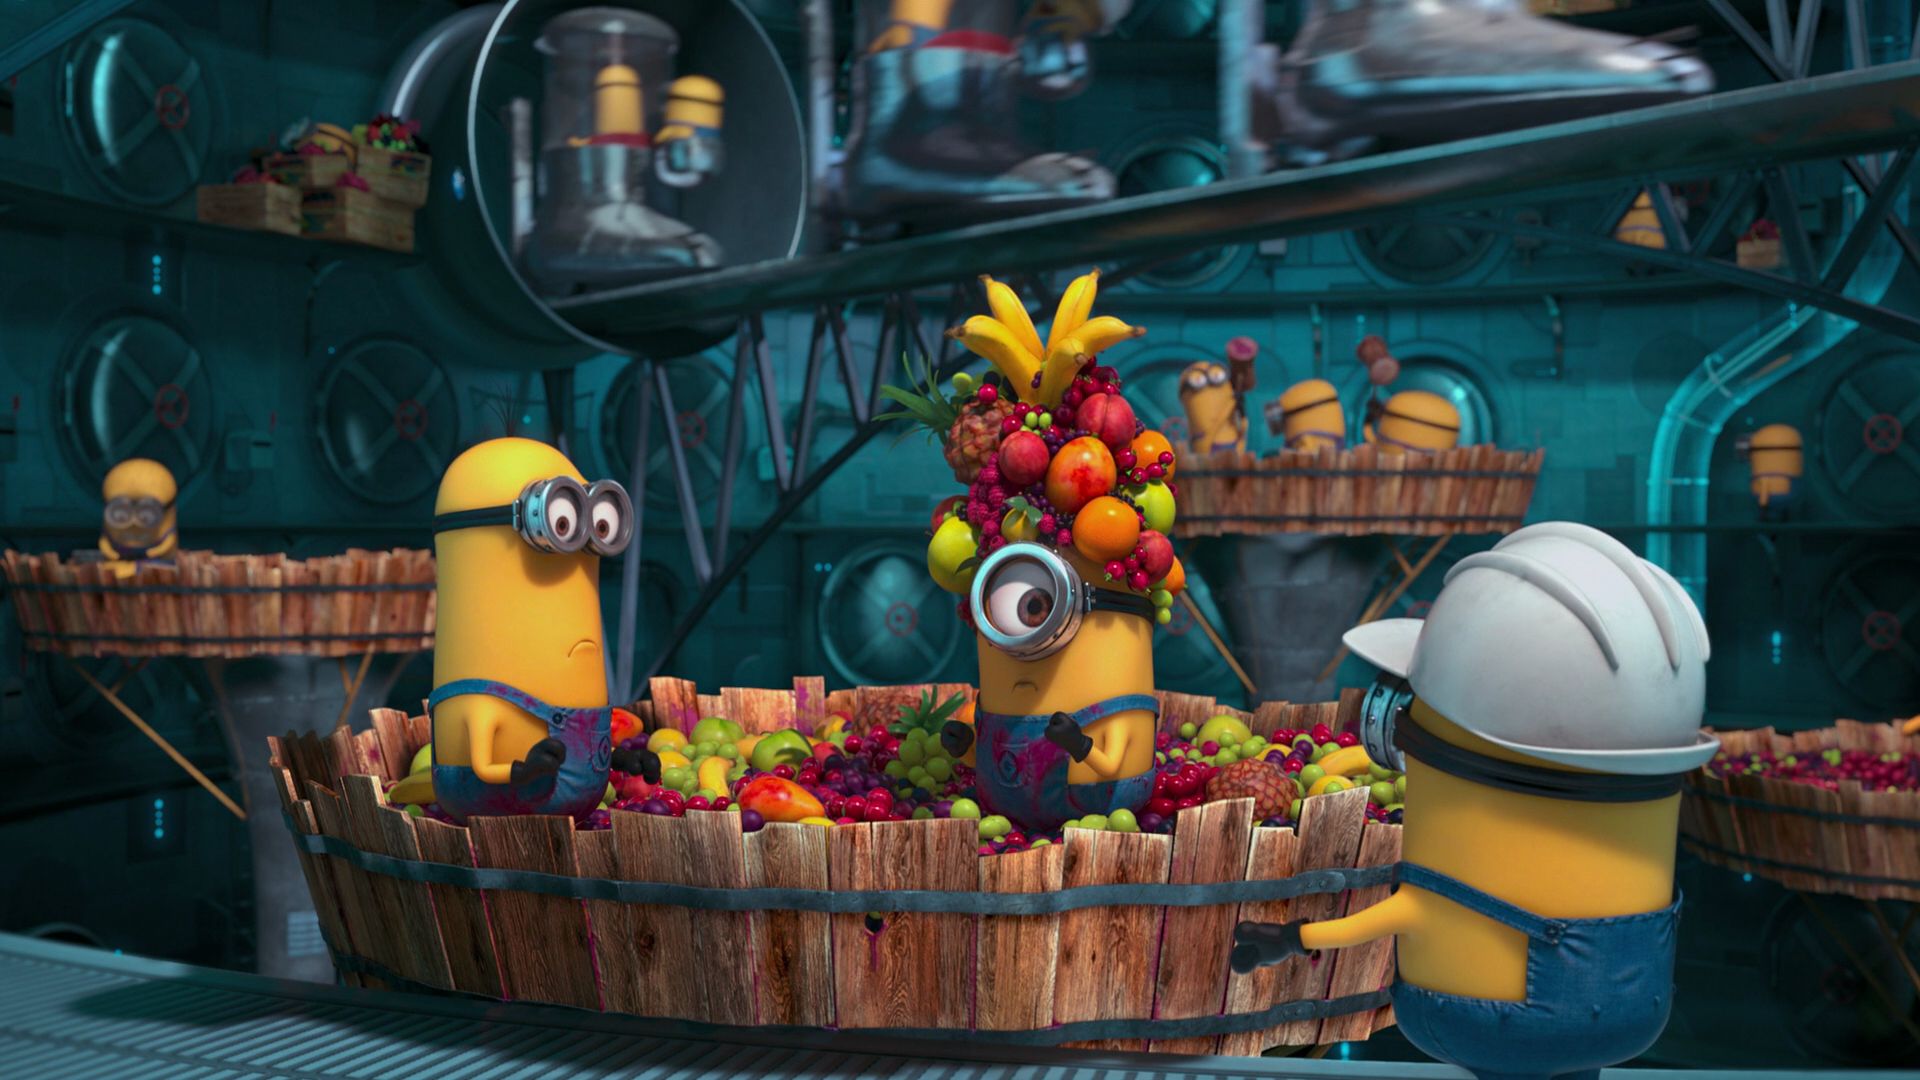 Despicable me 2 (2013) - Jelly Factory Scene